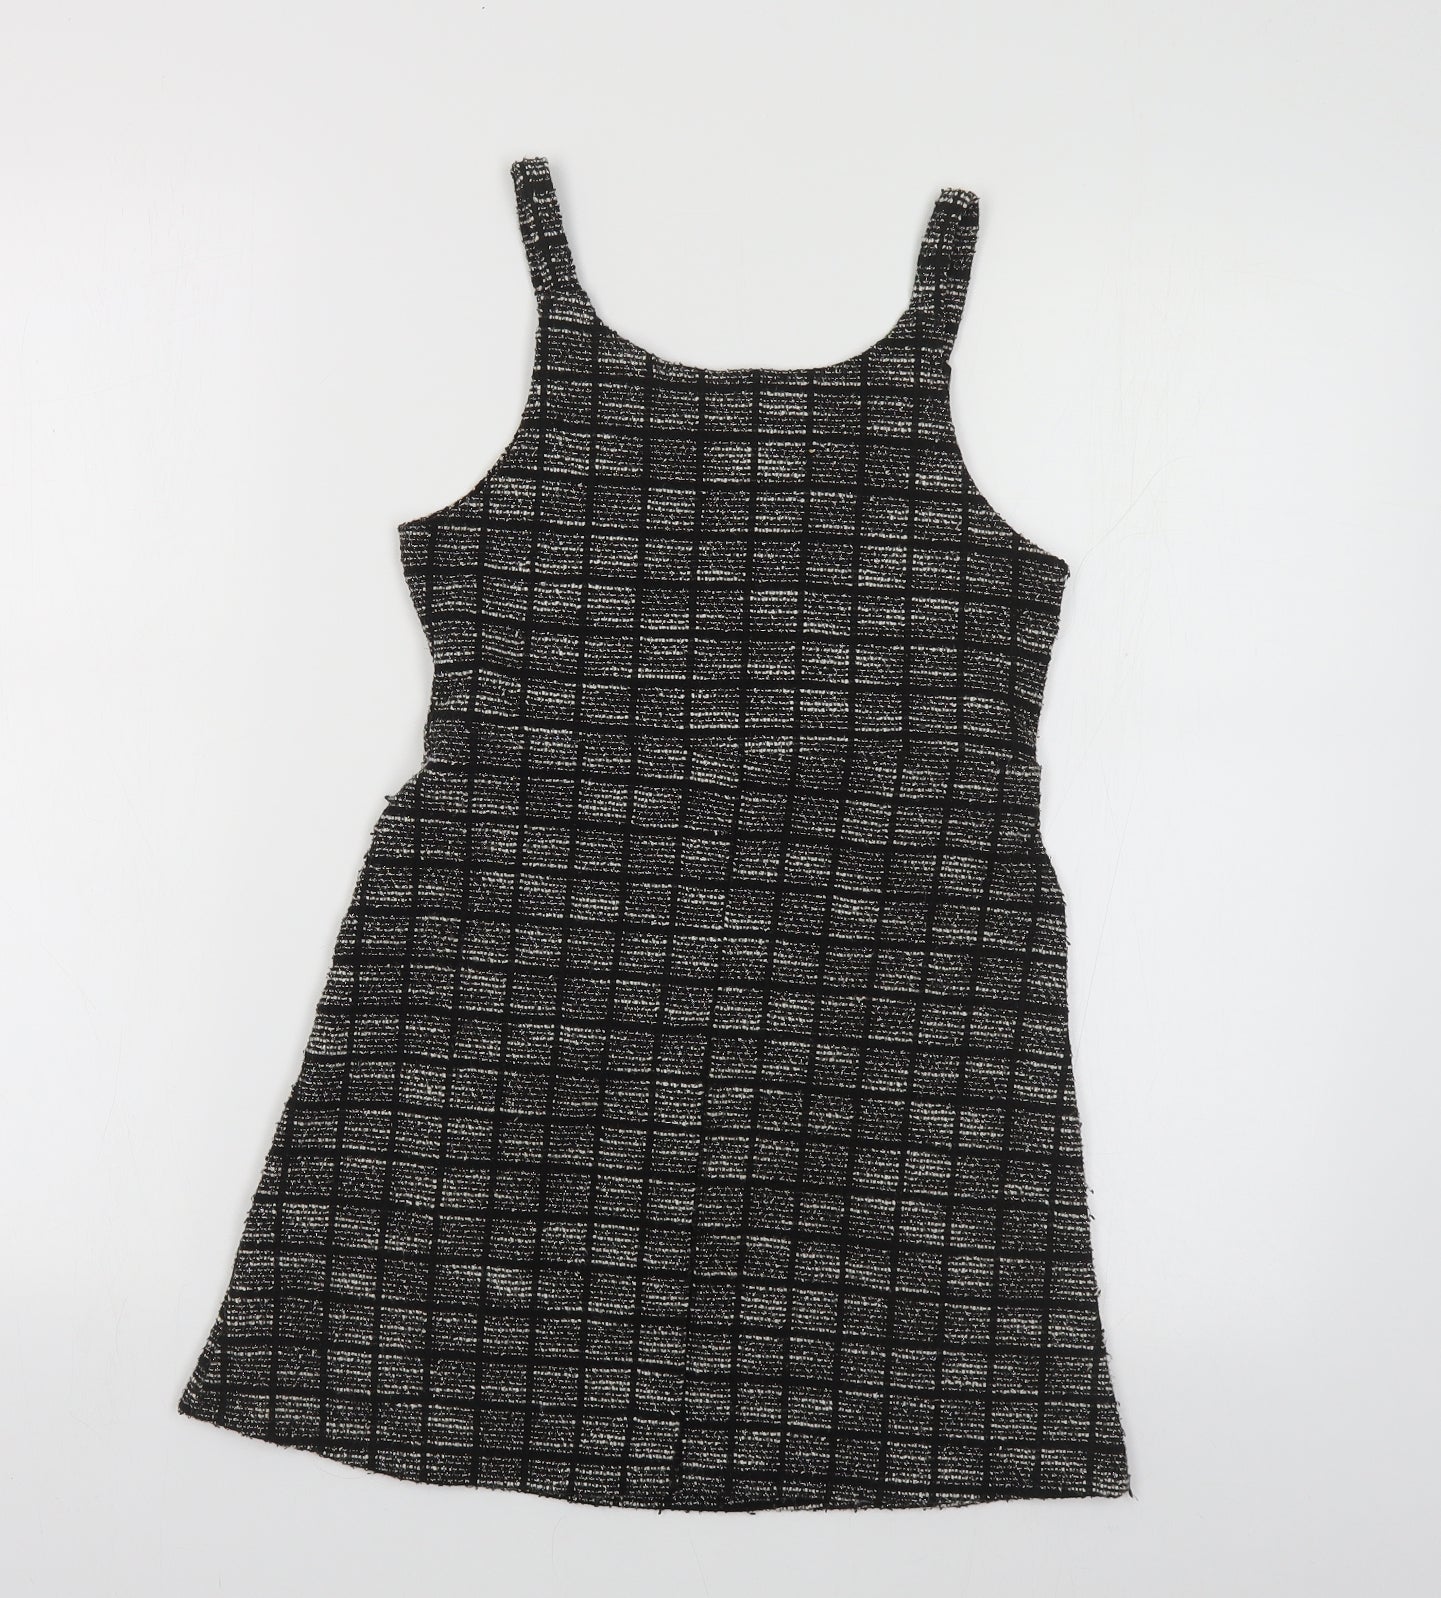 Primark Girls Grey Polyester Tank Dress Size 9-10 Years Scoop Neck Pullover